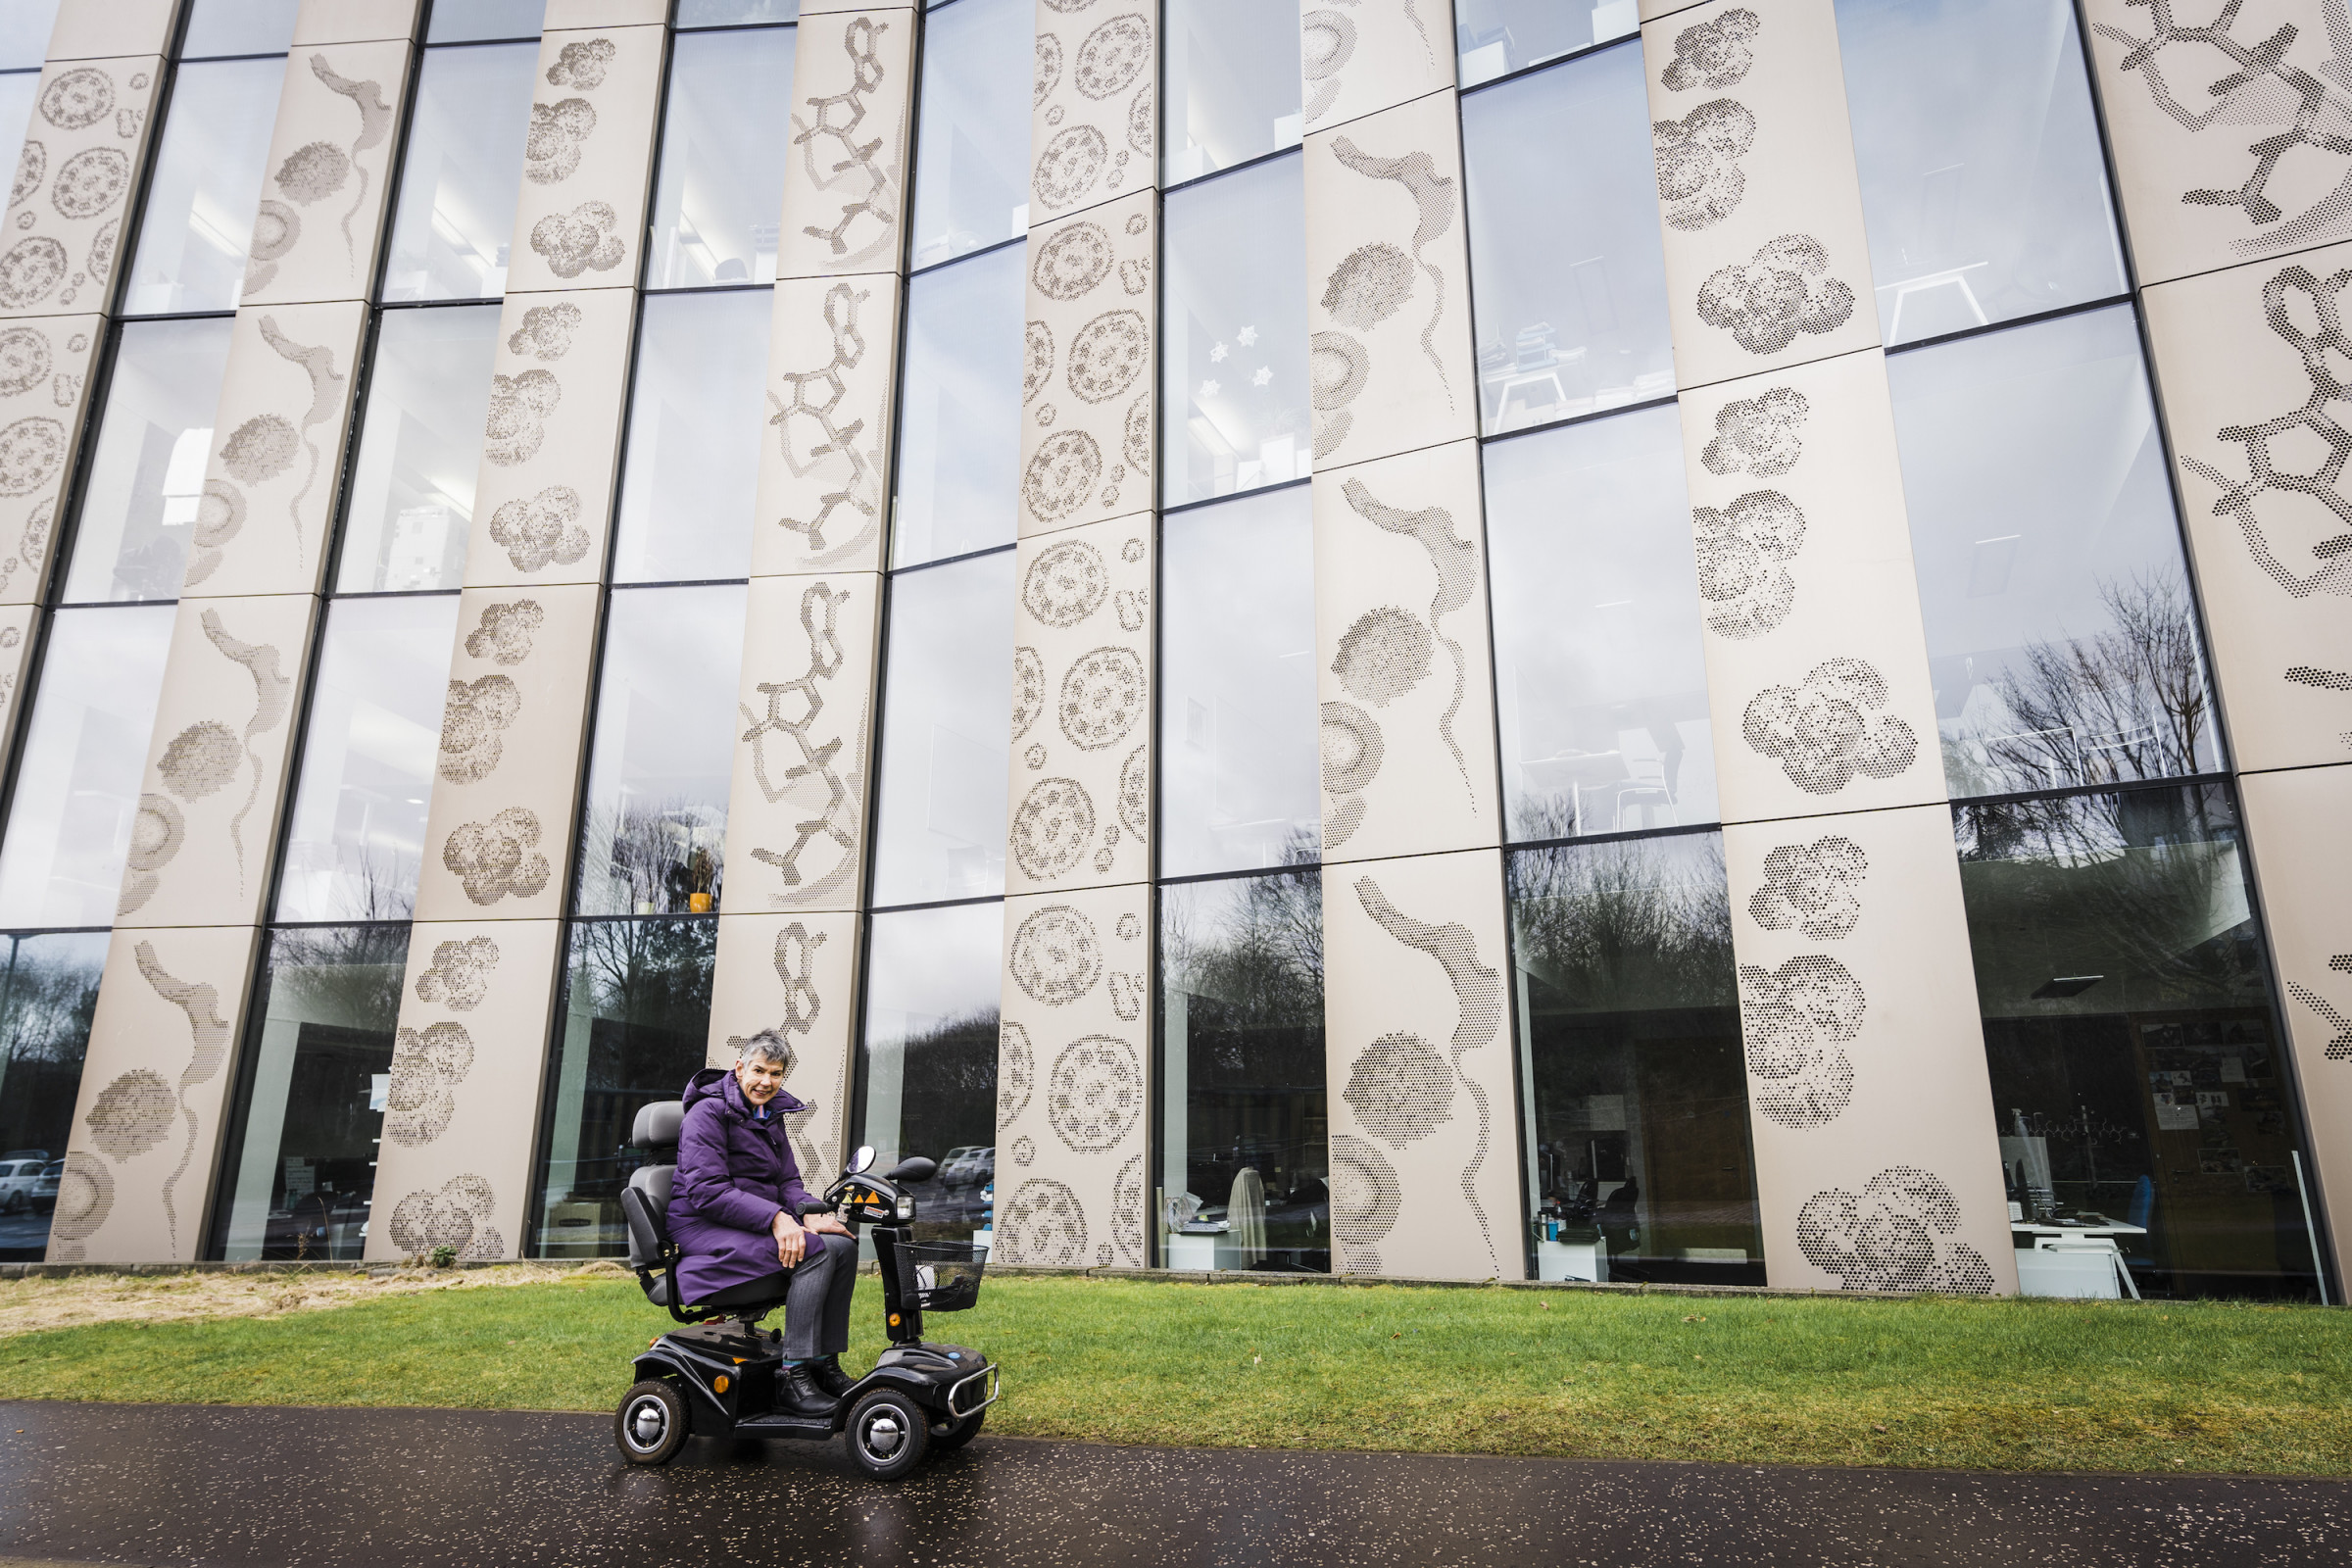 In a purple winter coat, Annalu sits in her motorized bicycle in front of a large building on the University of Dundee campus.